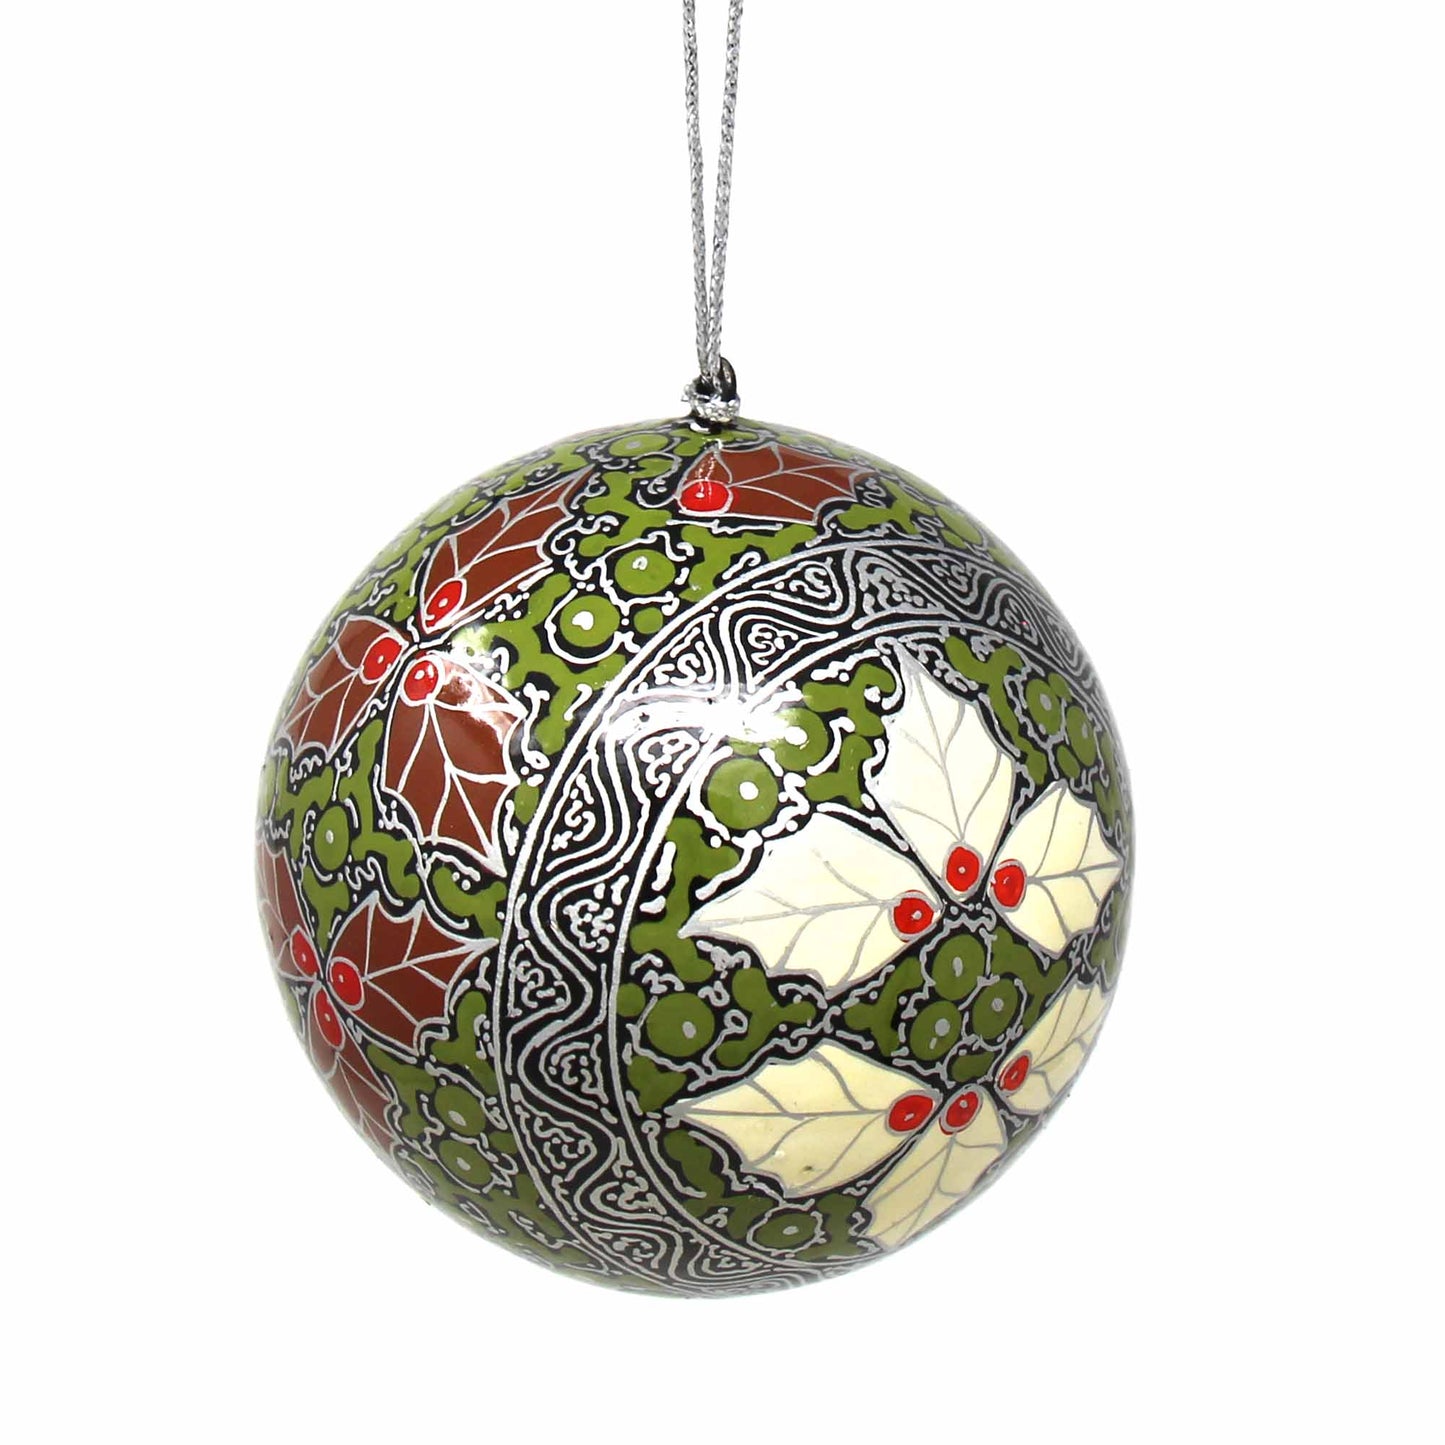 Handpainted Red and Silver Chinar Leaves Papier Mache Hanging Ball Ornament